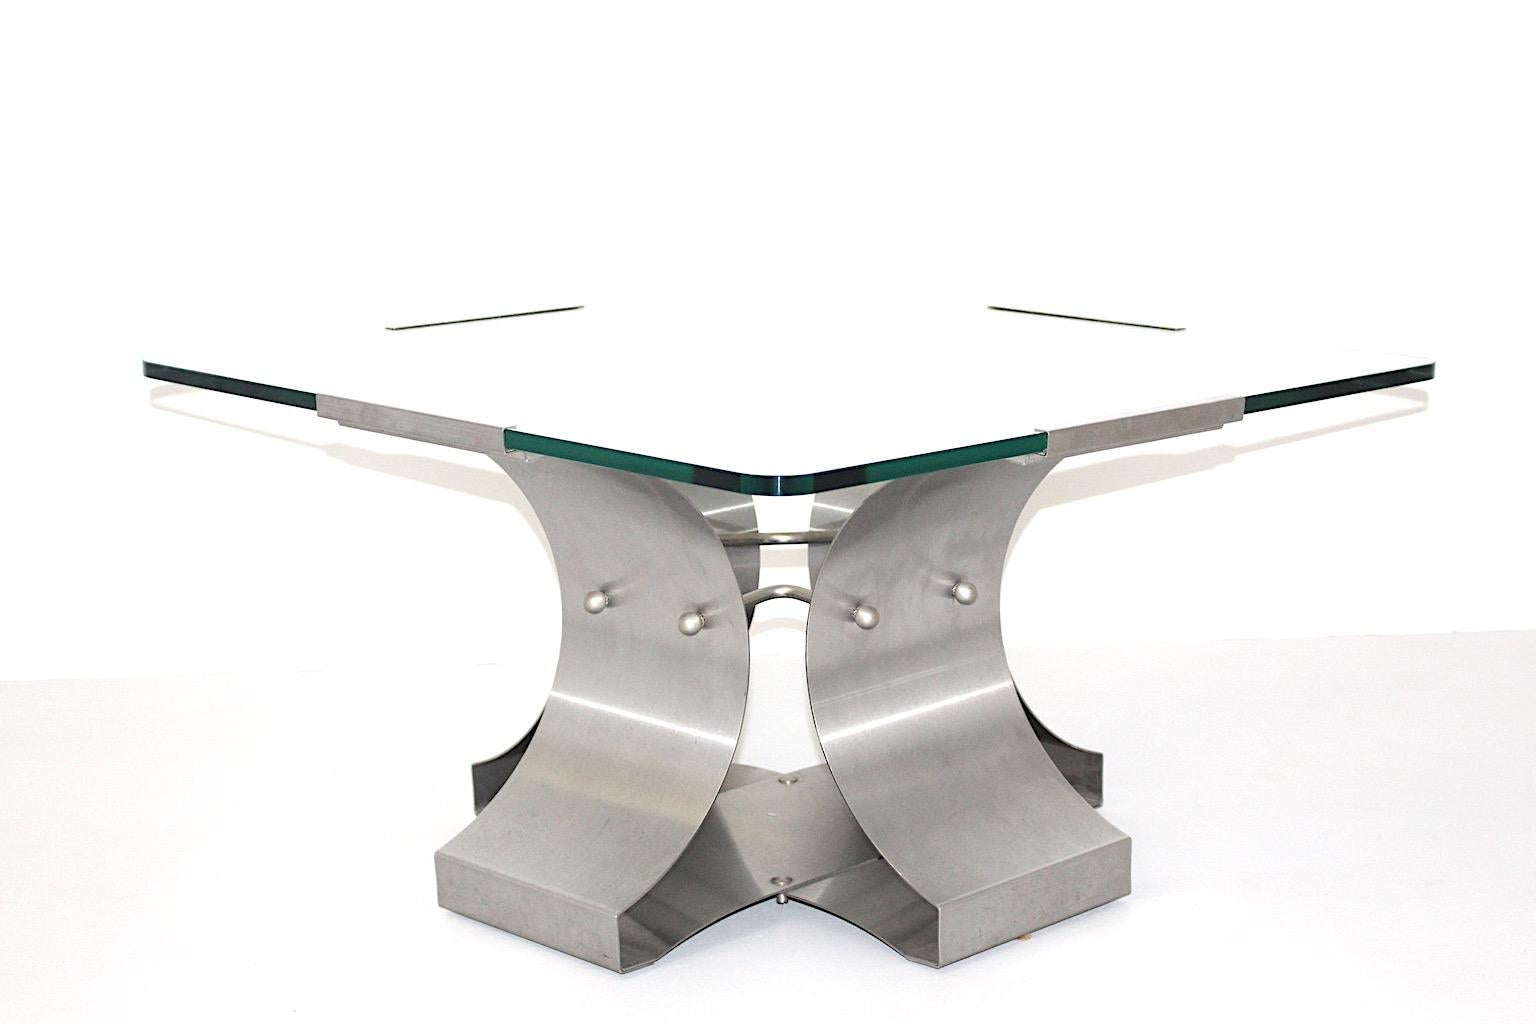 Modernist vintage square coffee table by Francois Monnet from stainless steel and glass 1970s France.
A fabulous coffee table in rare size from stainless steel and clear glass with a marvelous sleek and simple chic. With this sophisticated vibes and